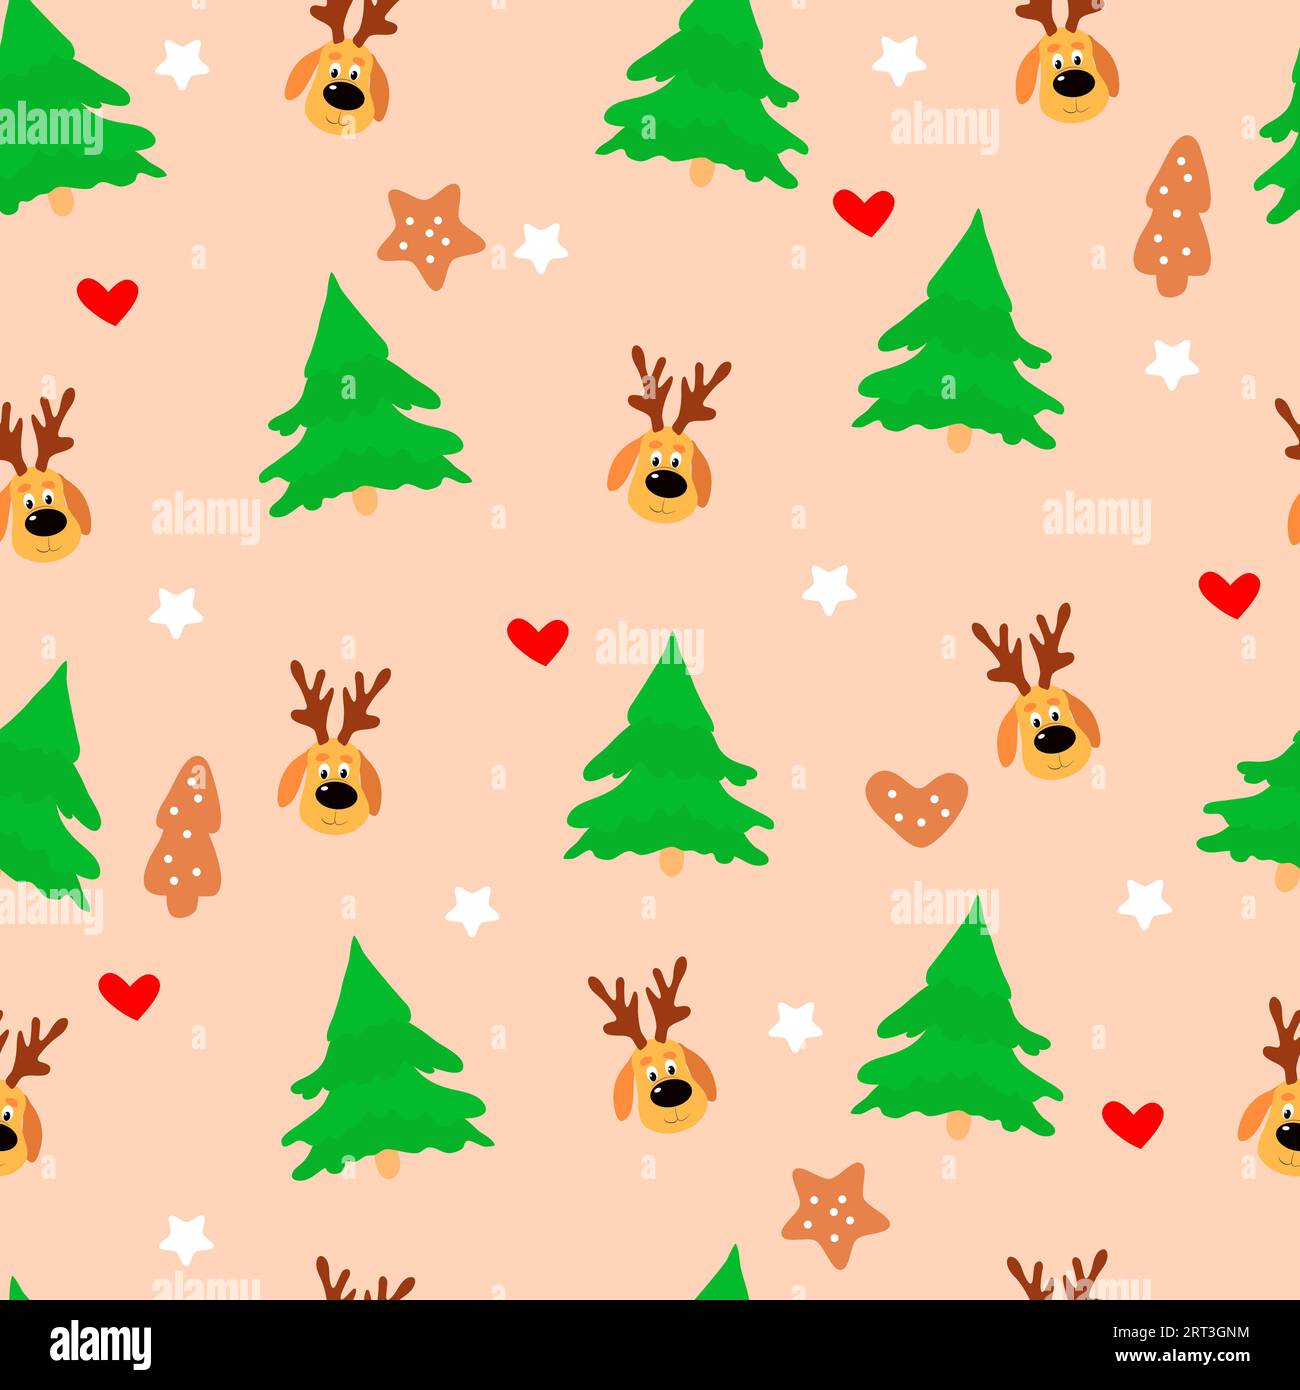 Christmas seamless pattern with fir trees, gingerbread, stars and deer faces. Light pink background. Design for wrapping paper, packaging, textiles. Stock Vector